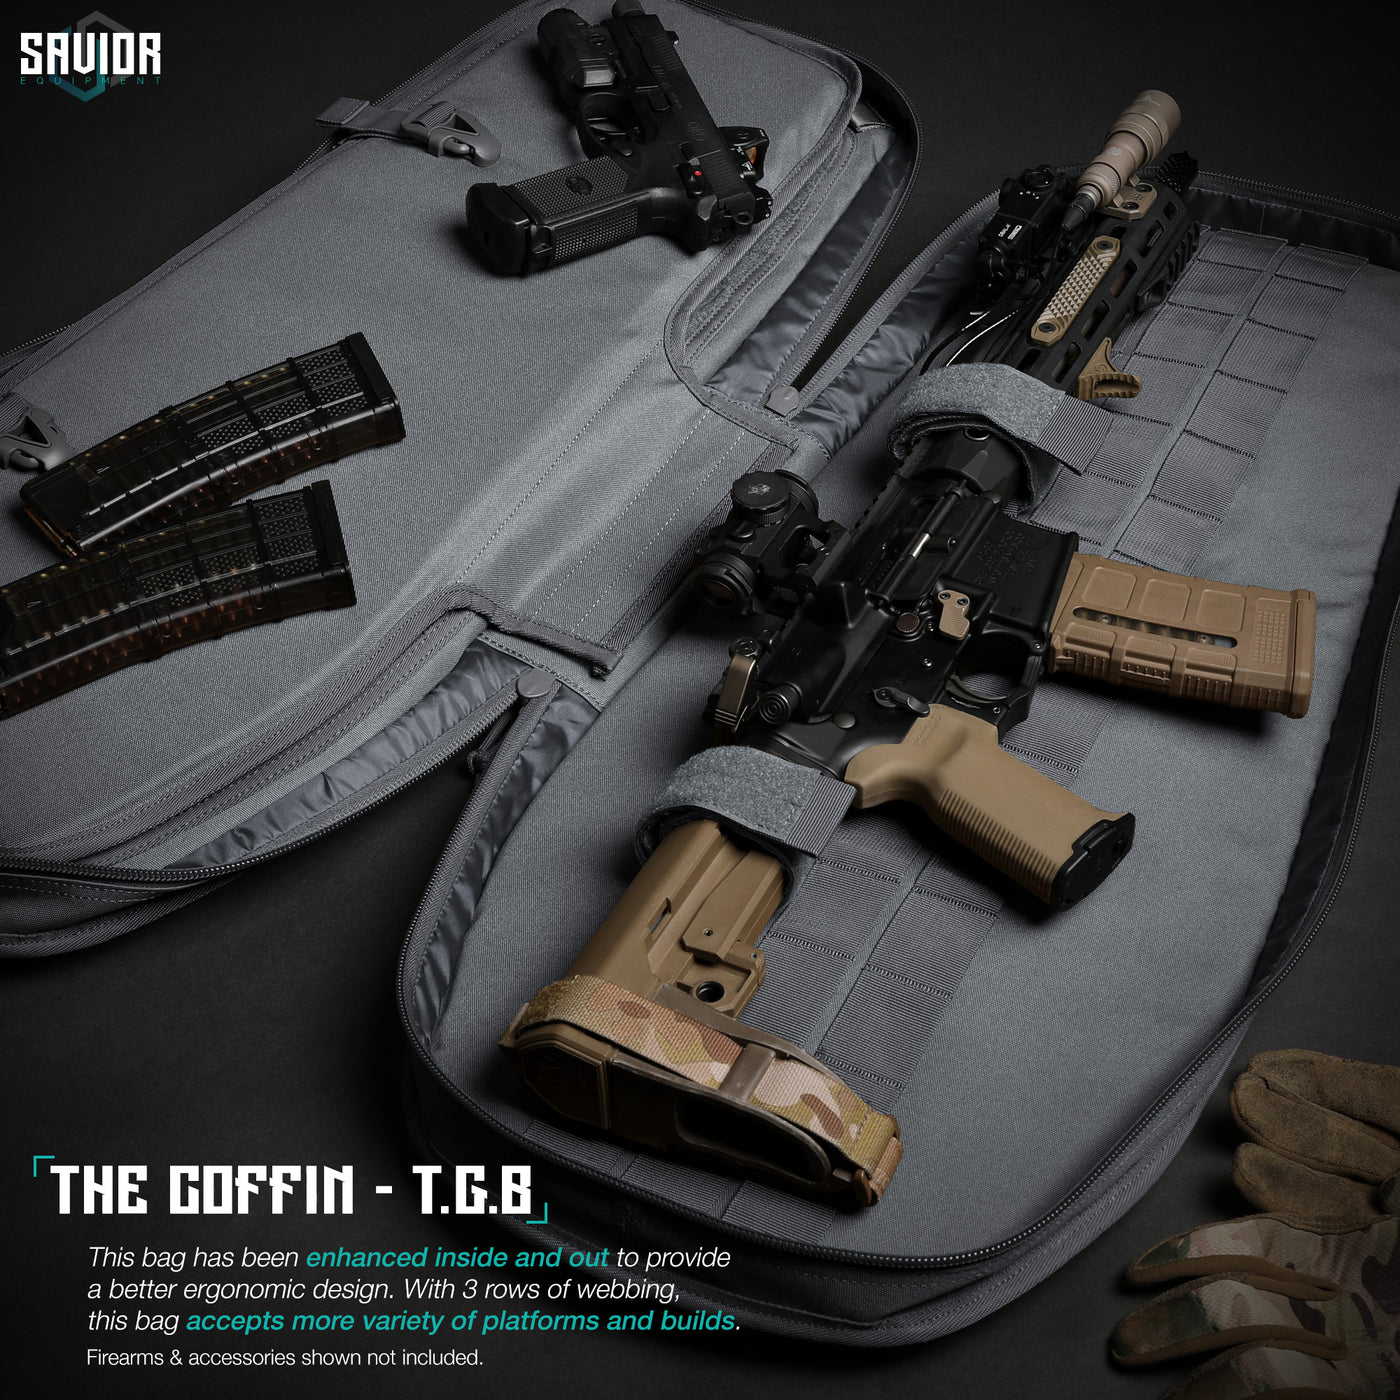 The Coffin - T.G.B - This bag has been enhanced inside and out to provide a better ergonomic design. With 3 rows of webbing, this bag accepts more variety of platforms and builds. Firearms & accessories shown not included.